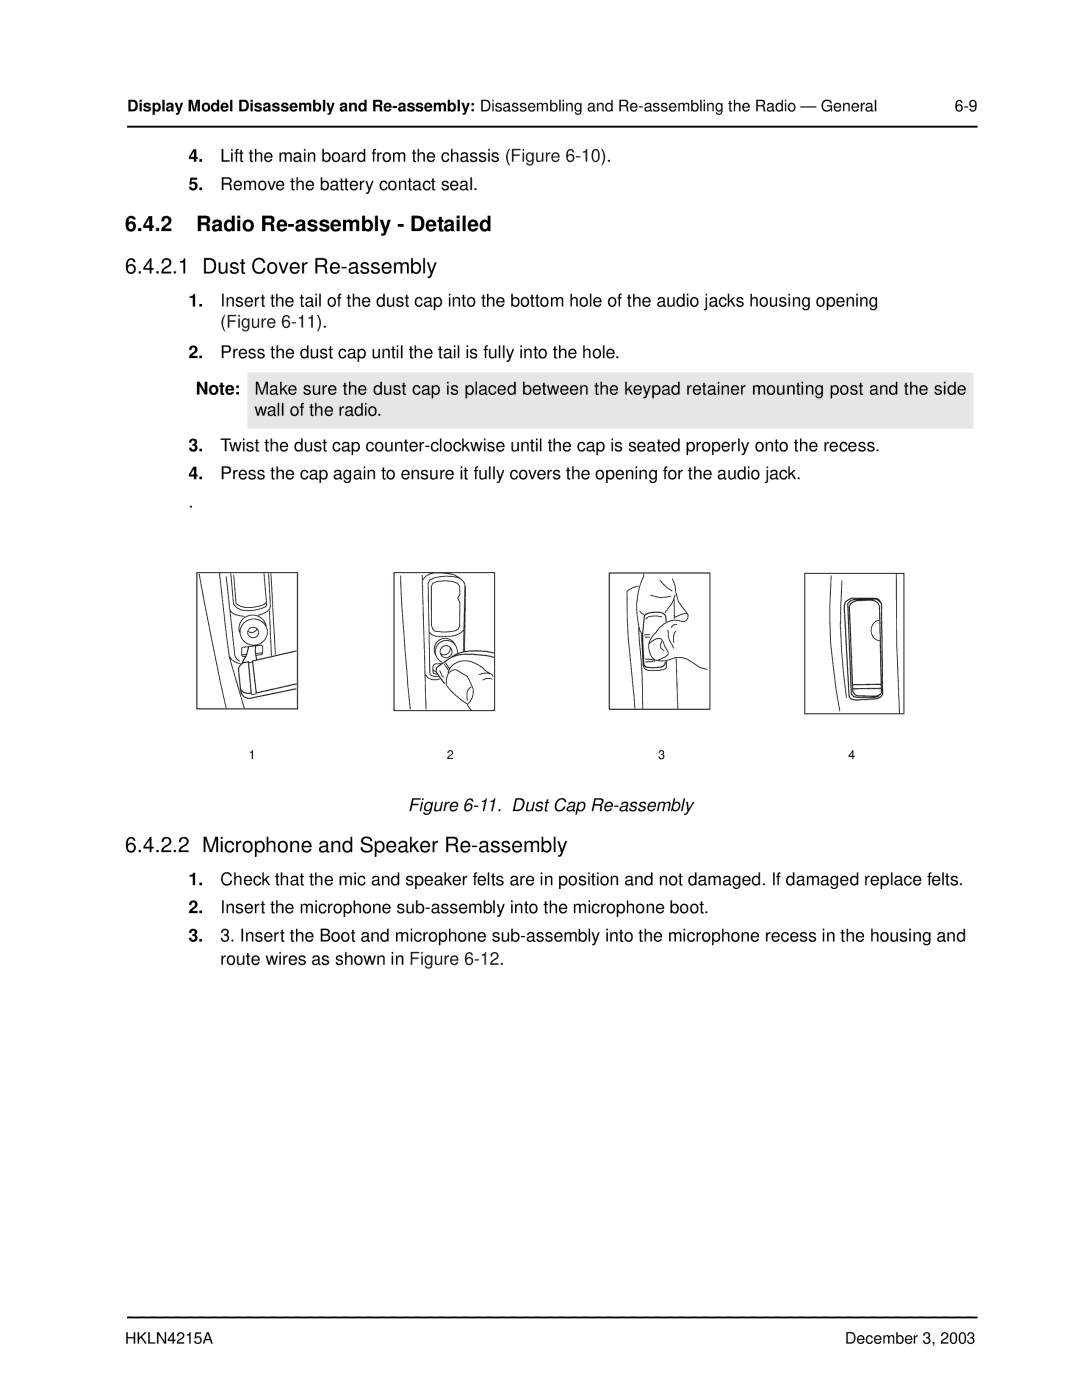 Motorola EP450 service manual Radio Re-assembly Detailed, Dust Cover Re-assembly, Microphone and Speaker Re-assembly 